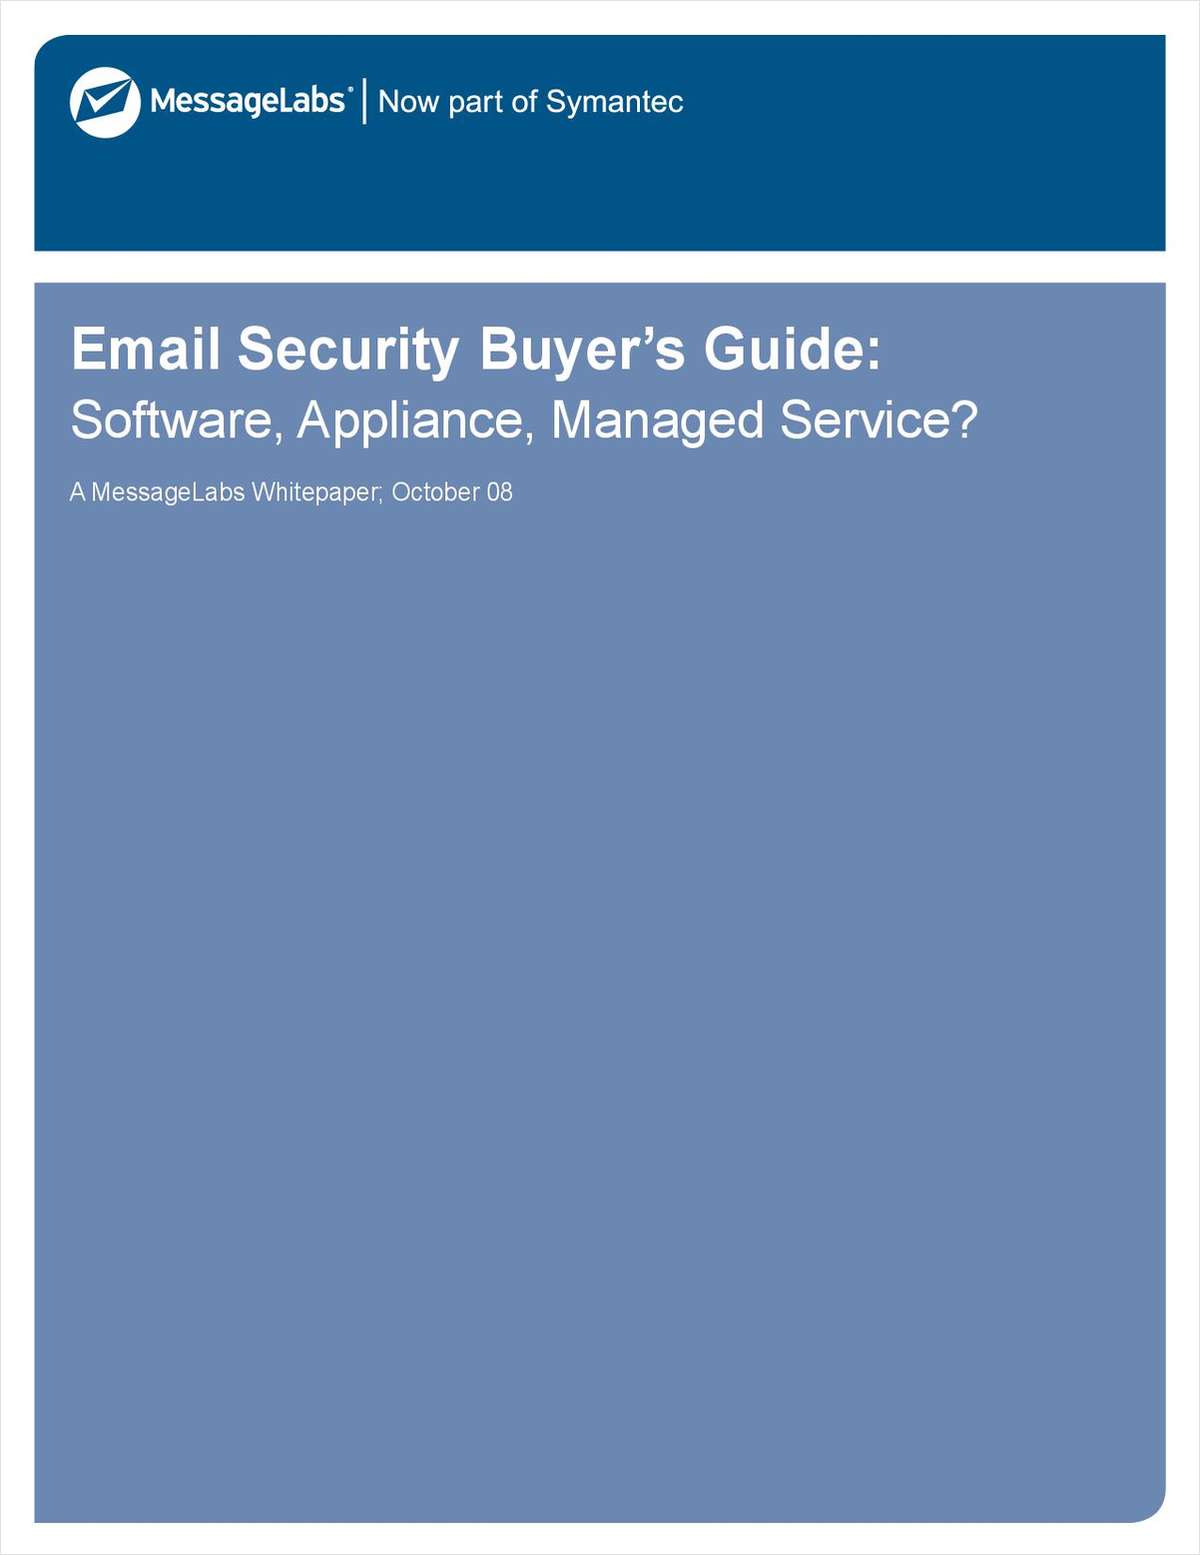 Email Security Buyer's Guide